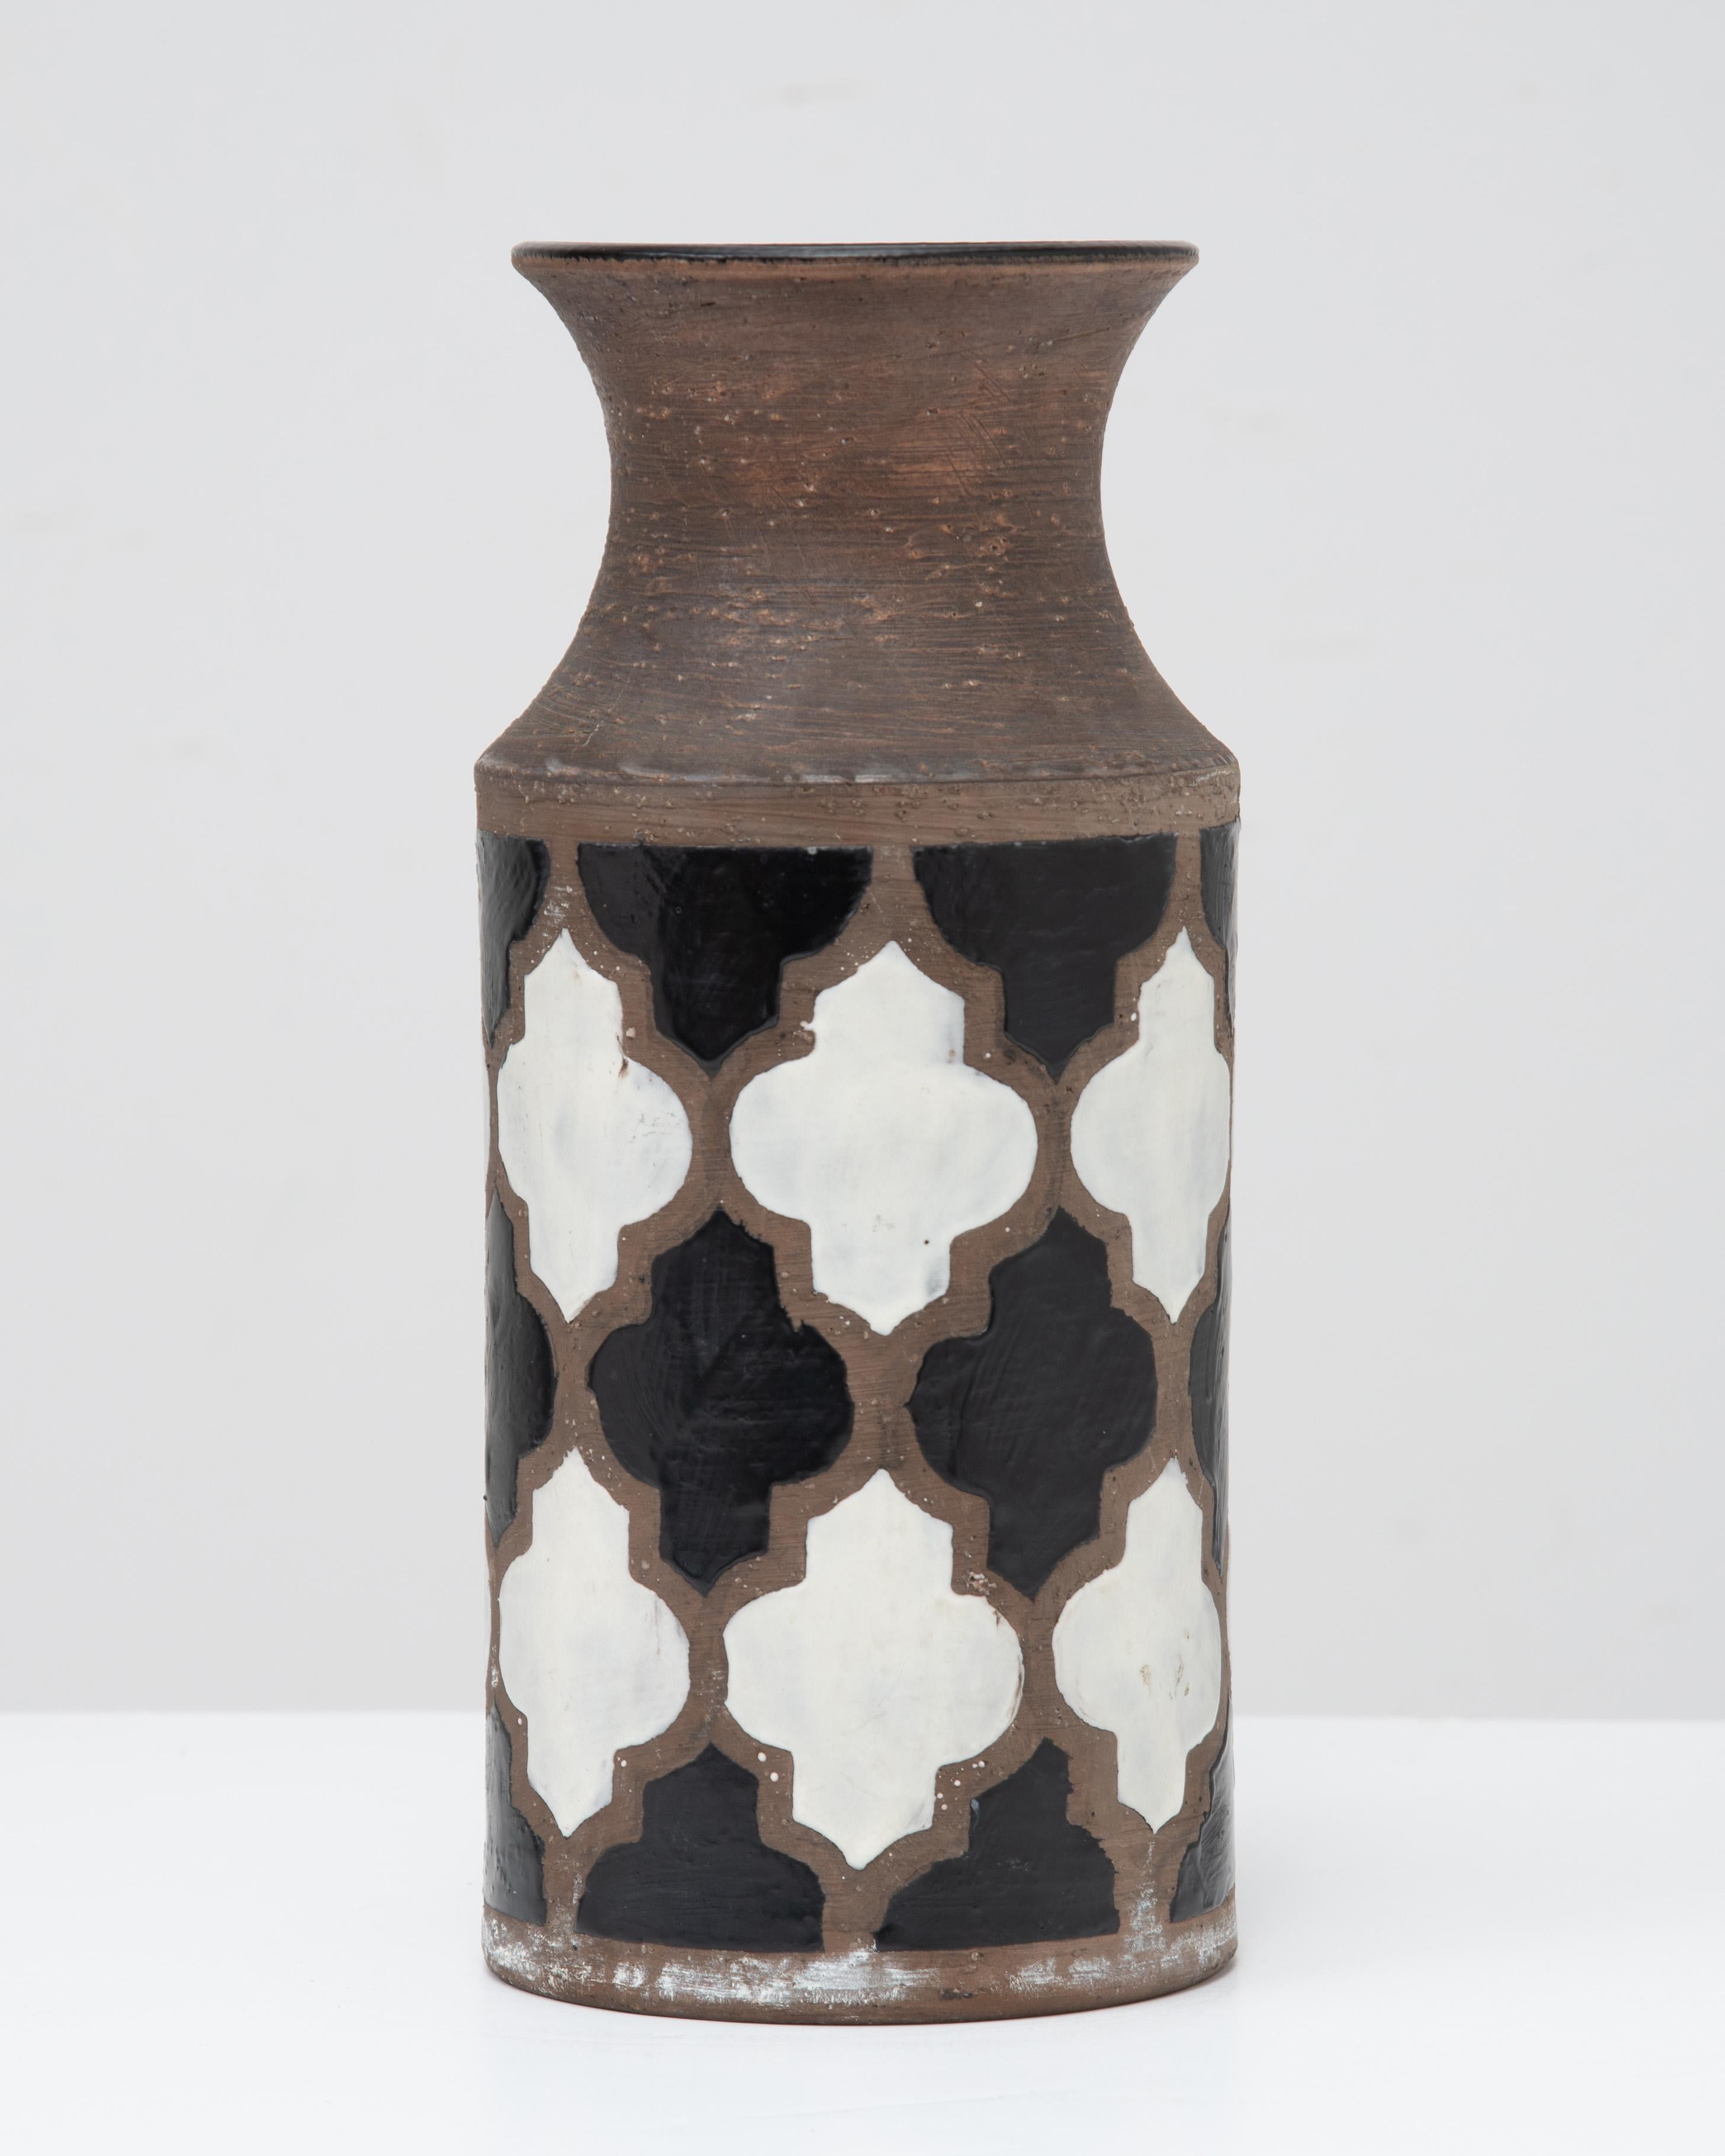 A wonderful Aldo Londi for Bitossi harlequin 8571B series ceramic vase. A black and off white pattern on an umber to burnt umber bisque body.